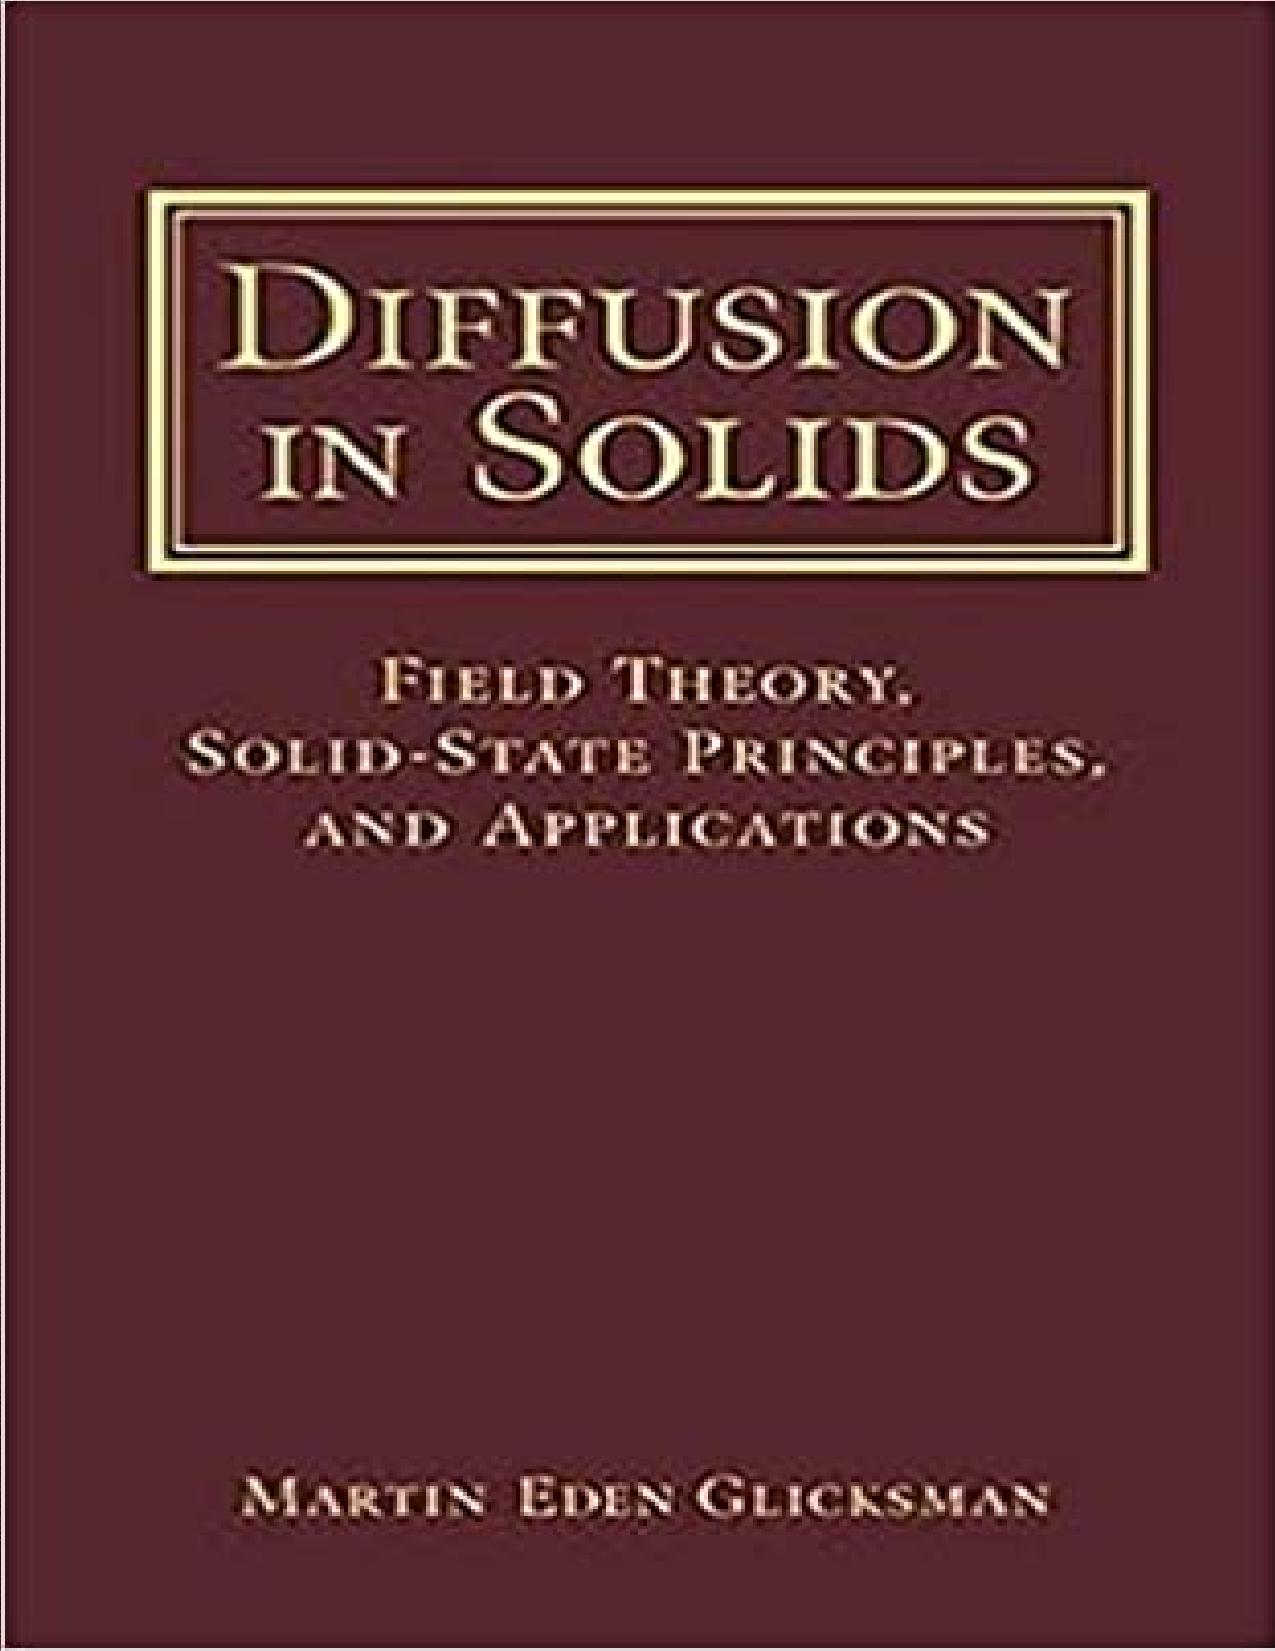 (eBook PDF)Diffusion in Solids: Field Theory, Solid-State Principles, and Applications by Martin Eden Glicksman